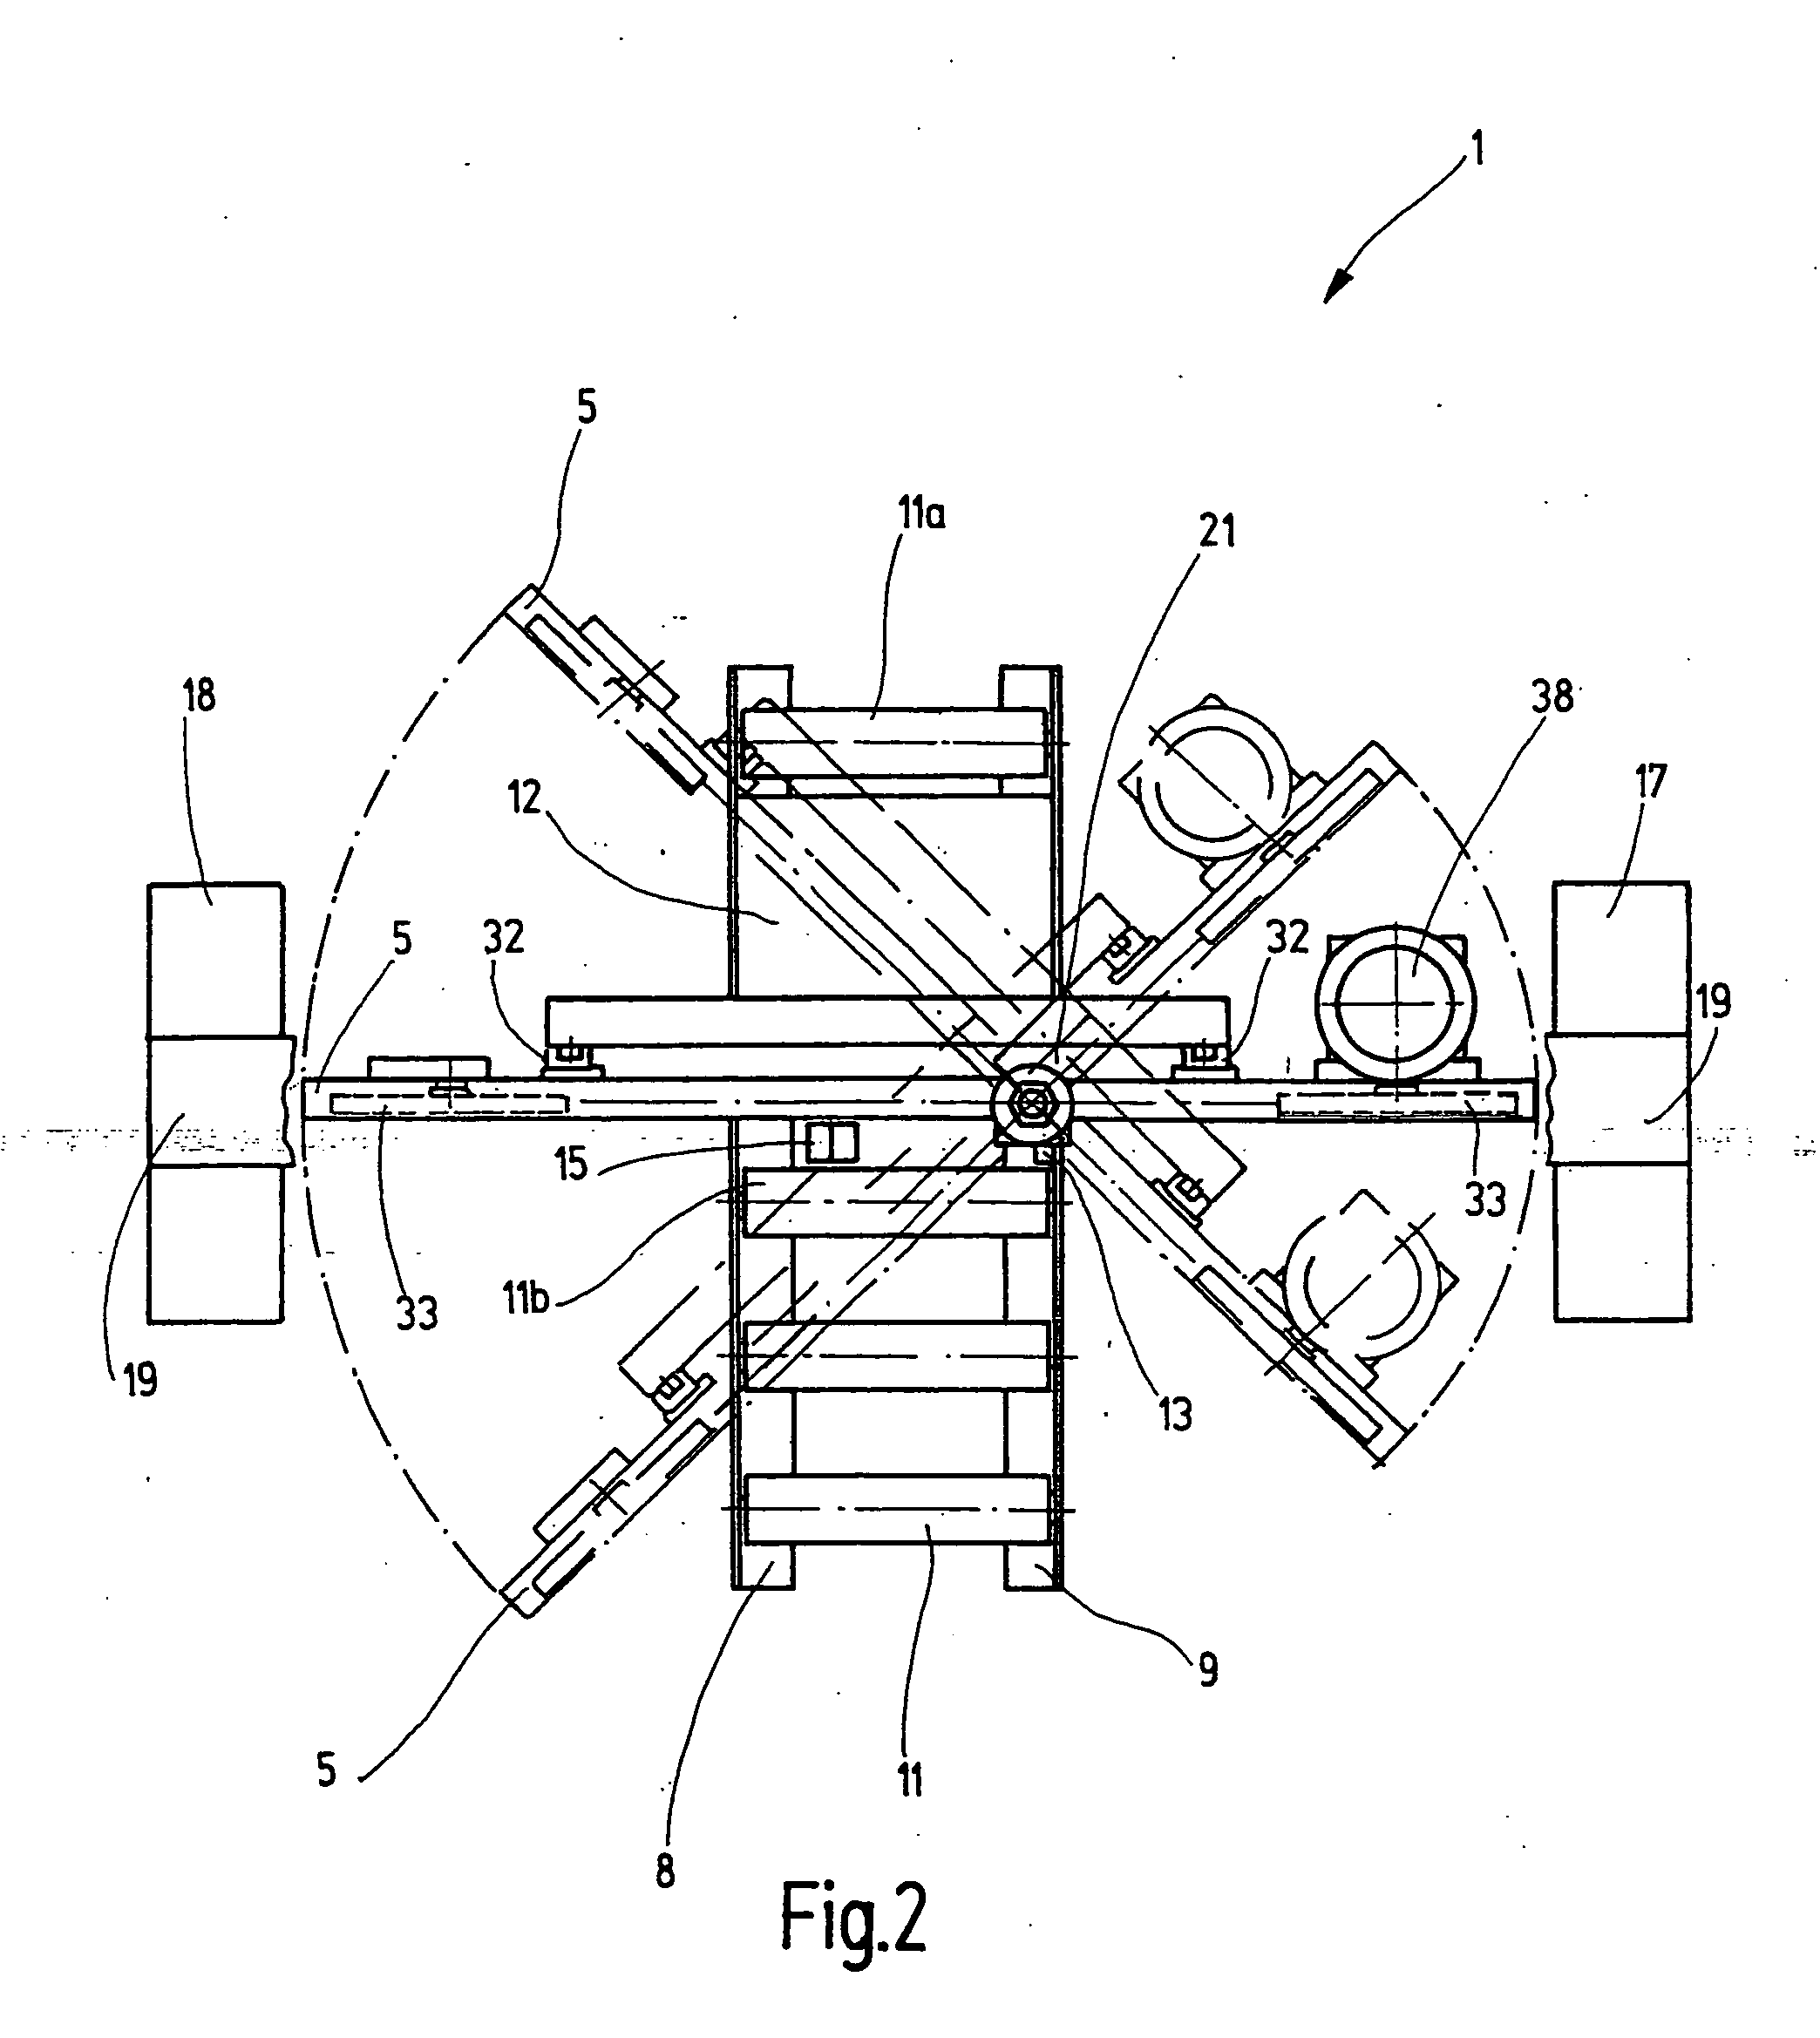 Metal cutting band saw comprising a suspended saw frame